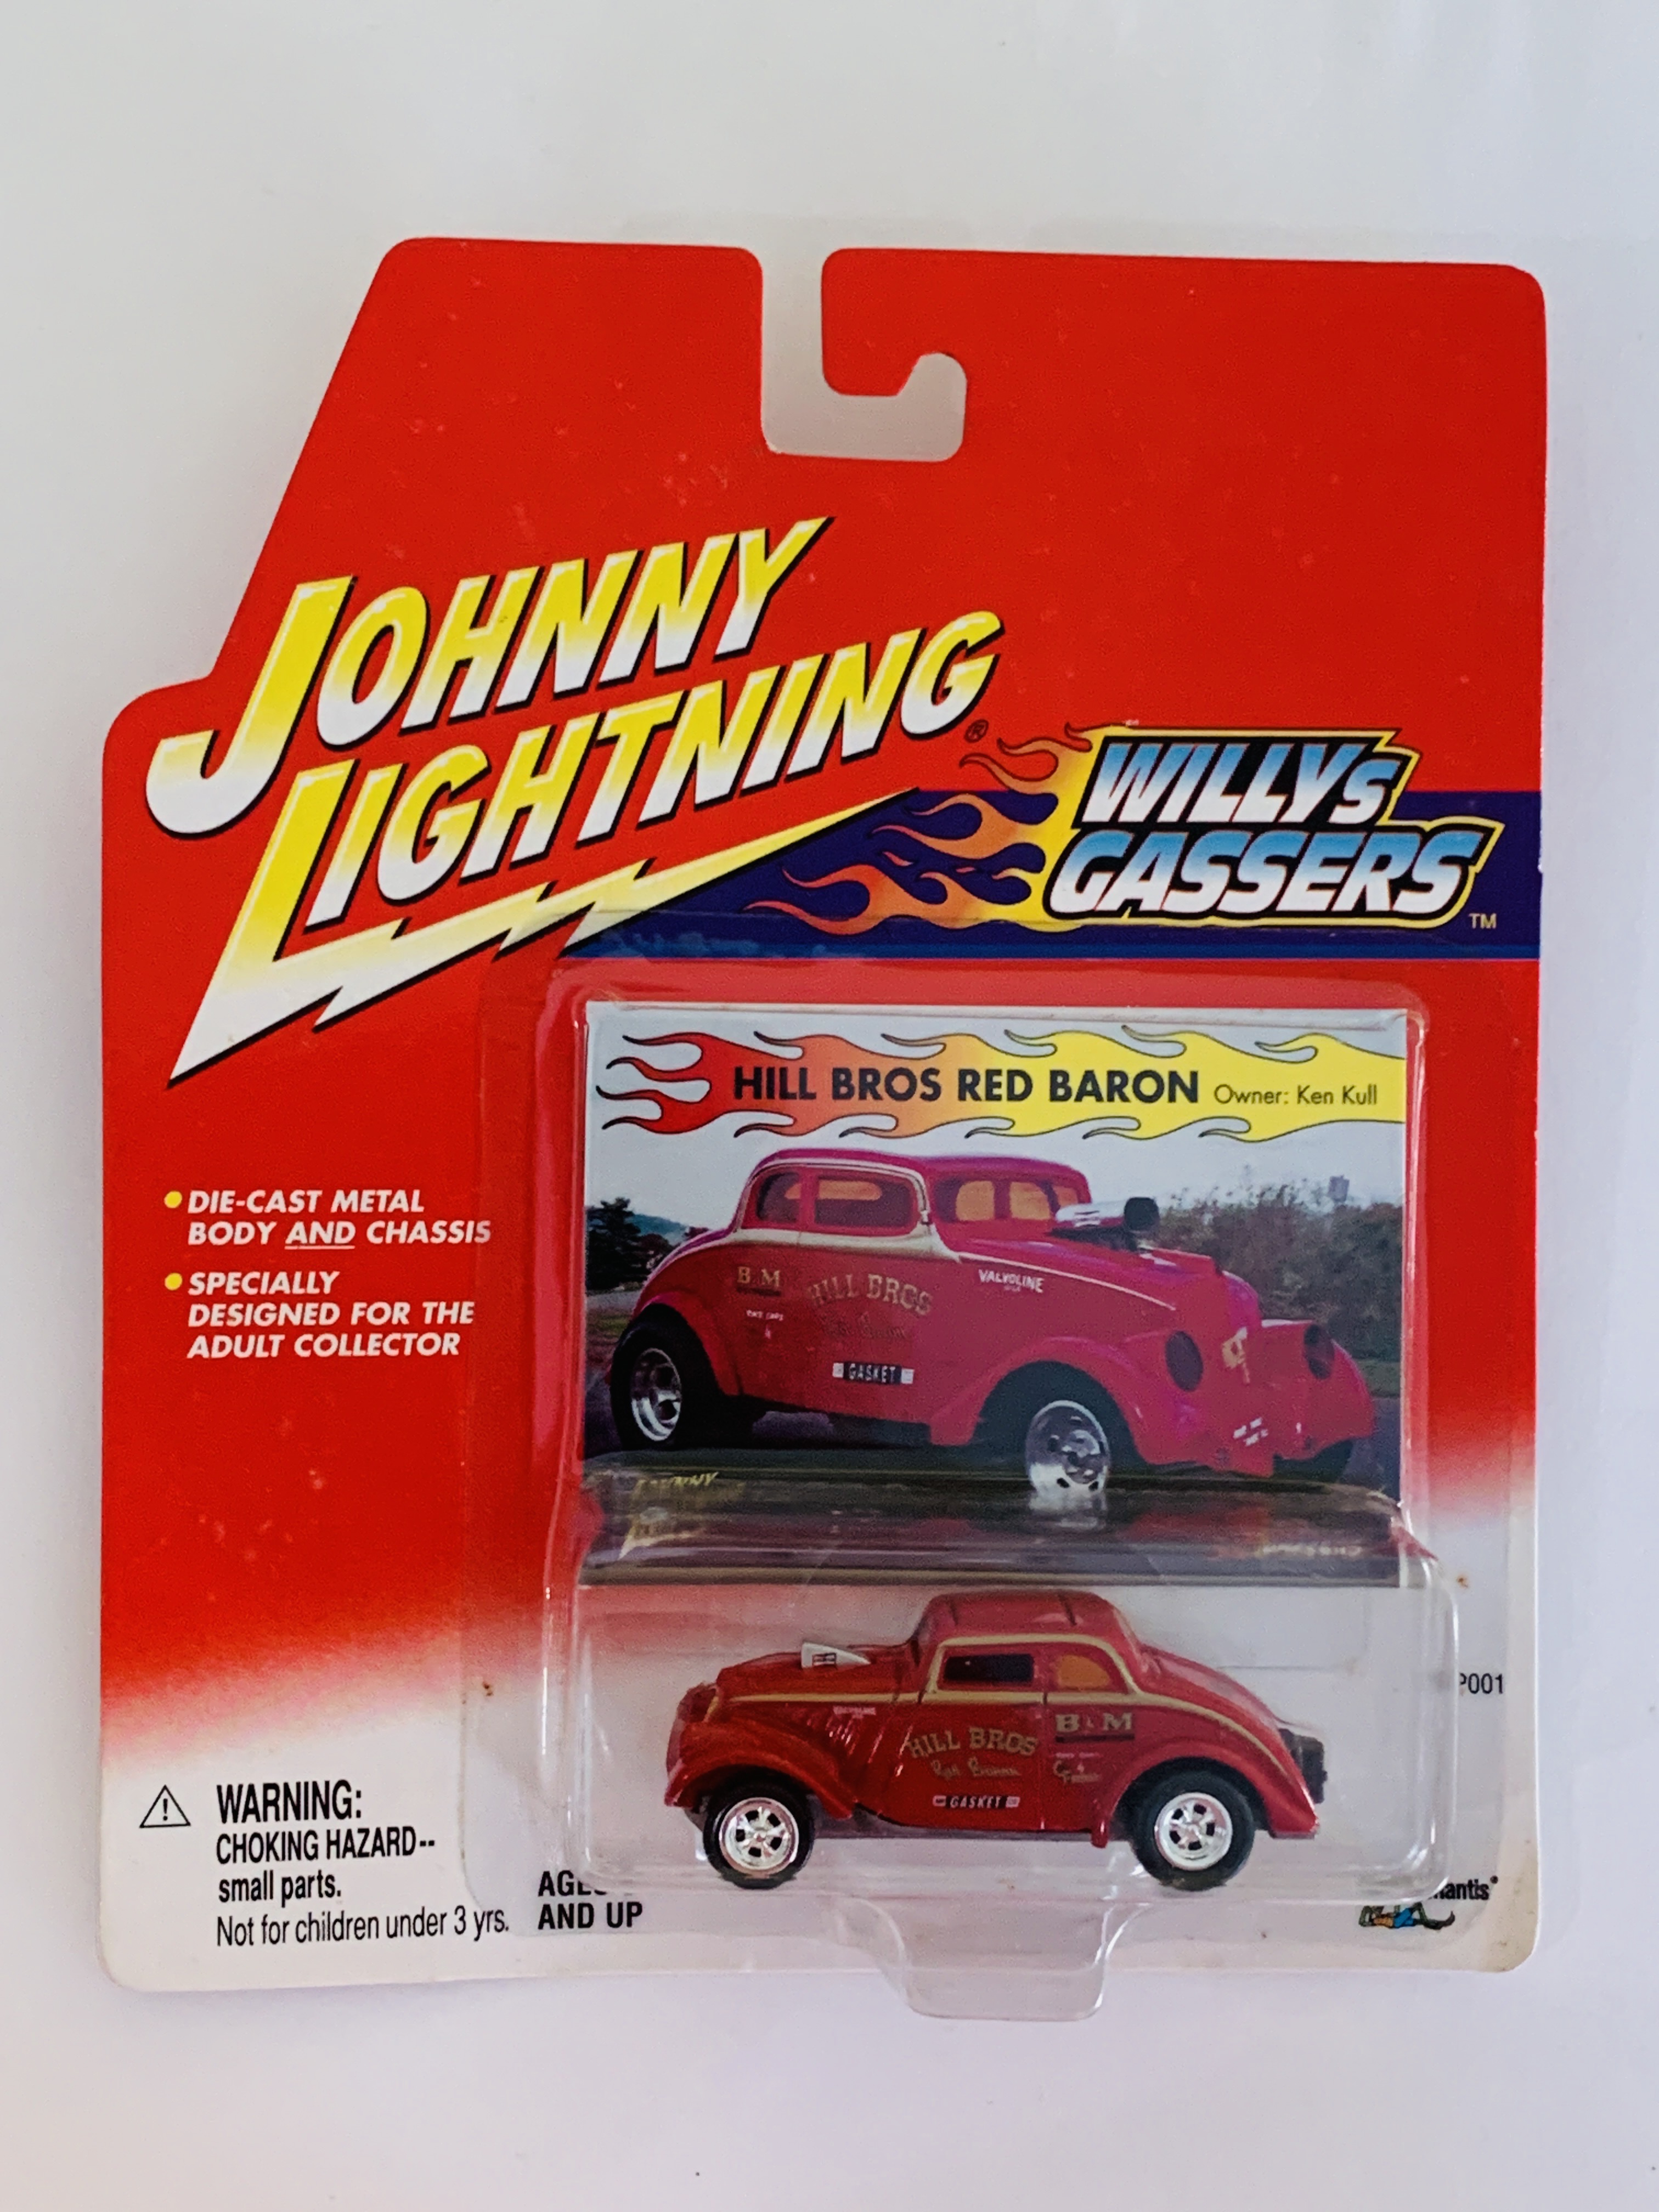 Johnny Lightning Willys Gassers Hills Bros Red Baron